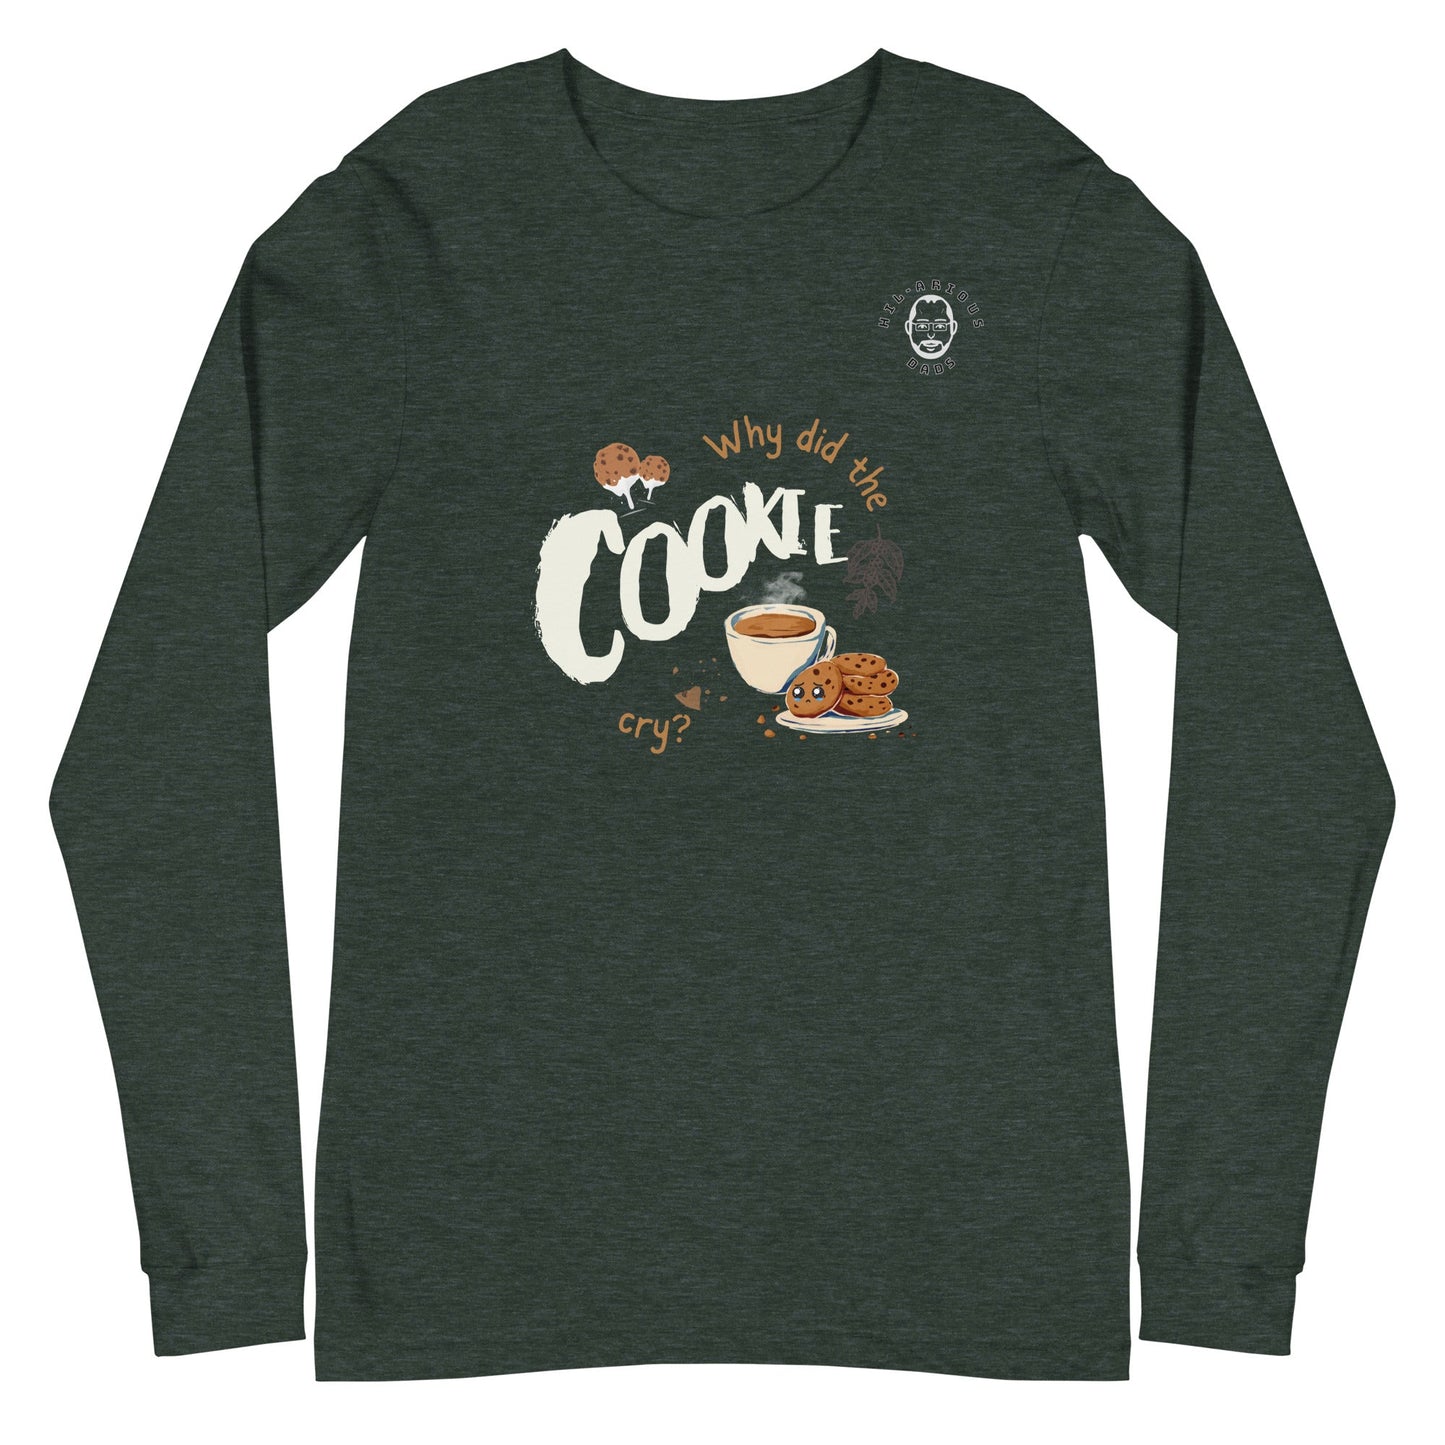 Why did the cookie cry?-Long Sleeve Tee - Hil-arious Dads